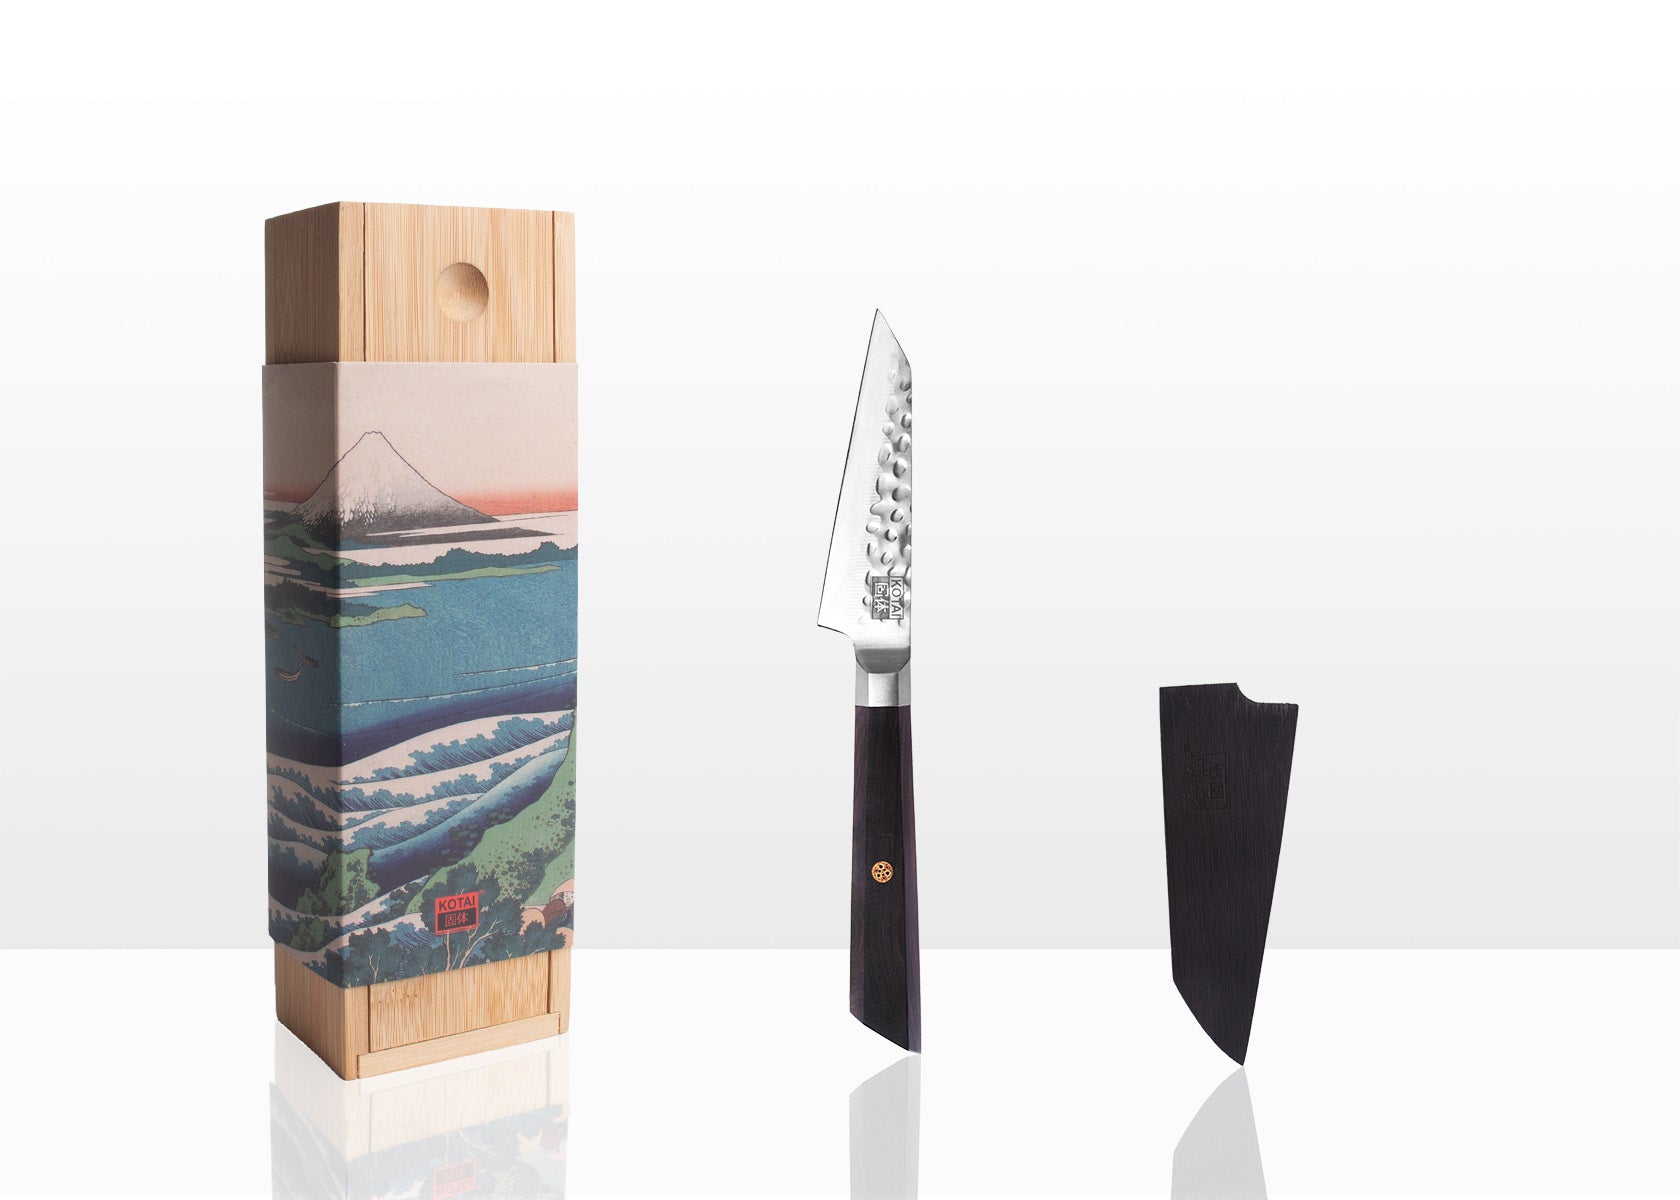 set of two kitchen knives and a bamboo cutting board and their packaging